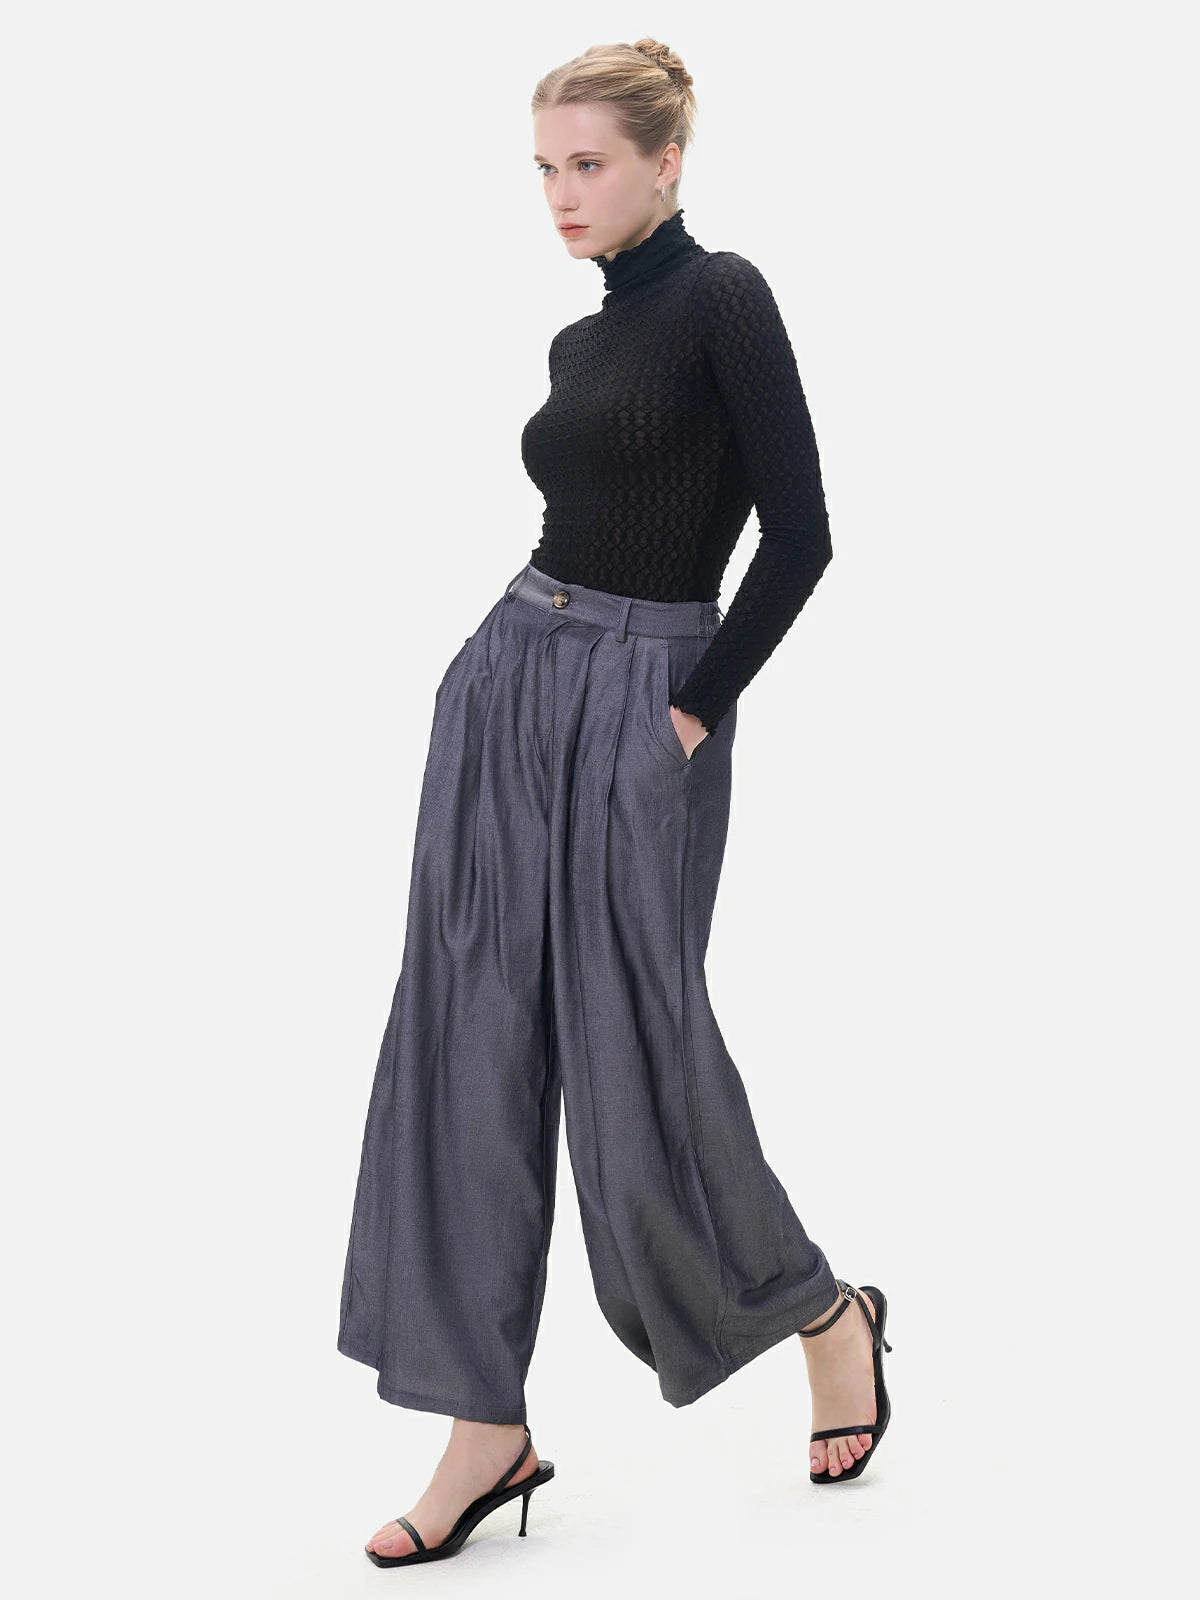 Feminine curve accentuation in trousers with elastic, button, and pleat designs